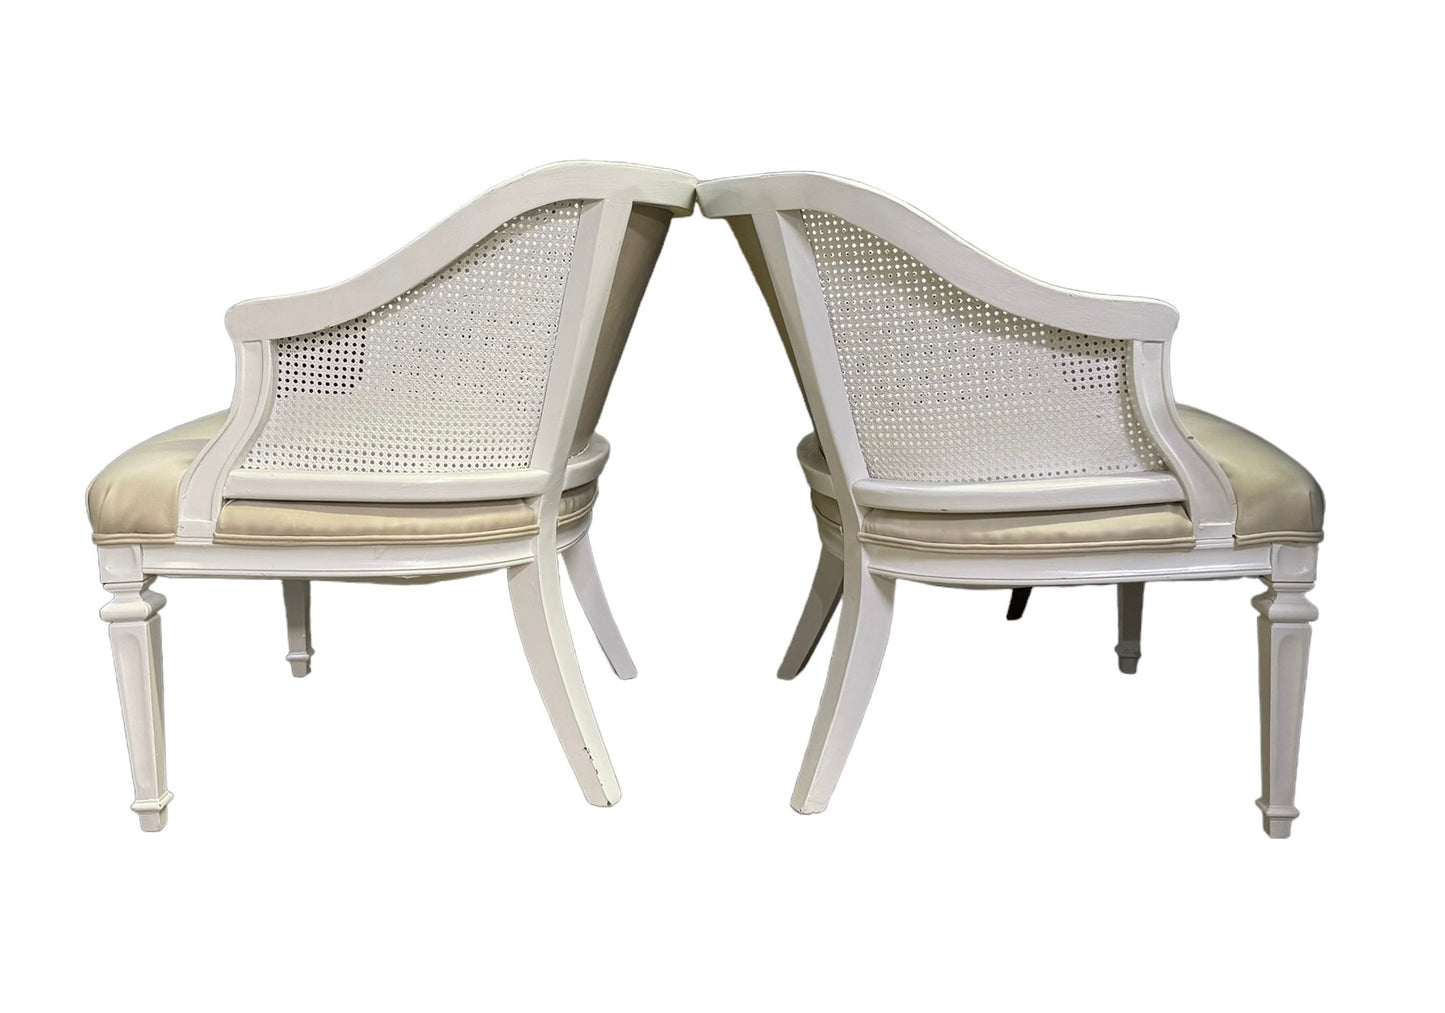 Vintage White Barrel Back and Cane Upholstered Chair Pair